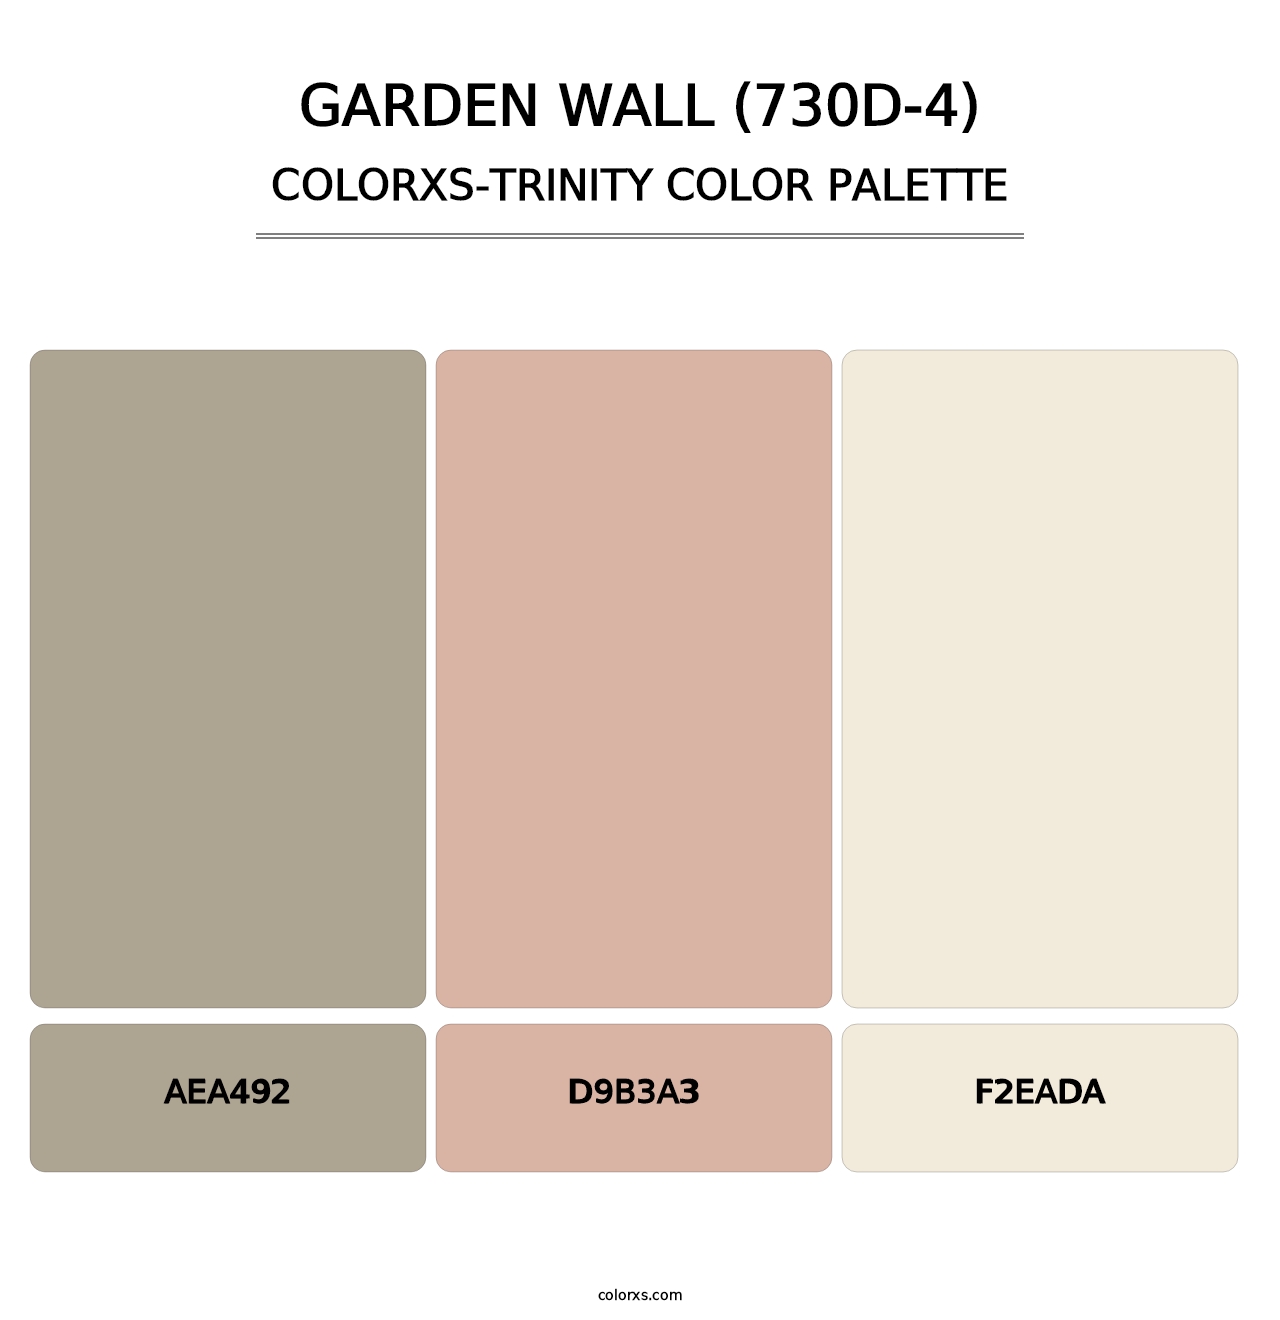 Garden Wall (730D-4) - Colorxs Trinity Palette